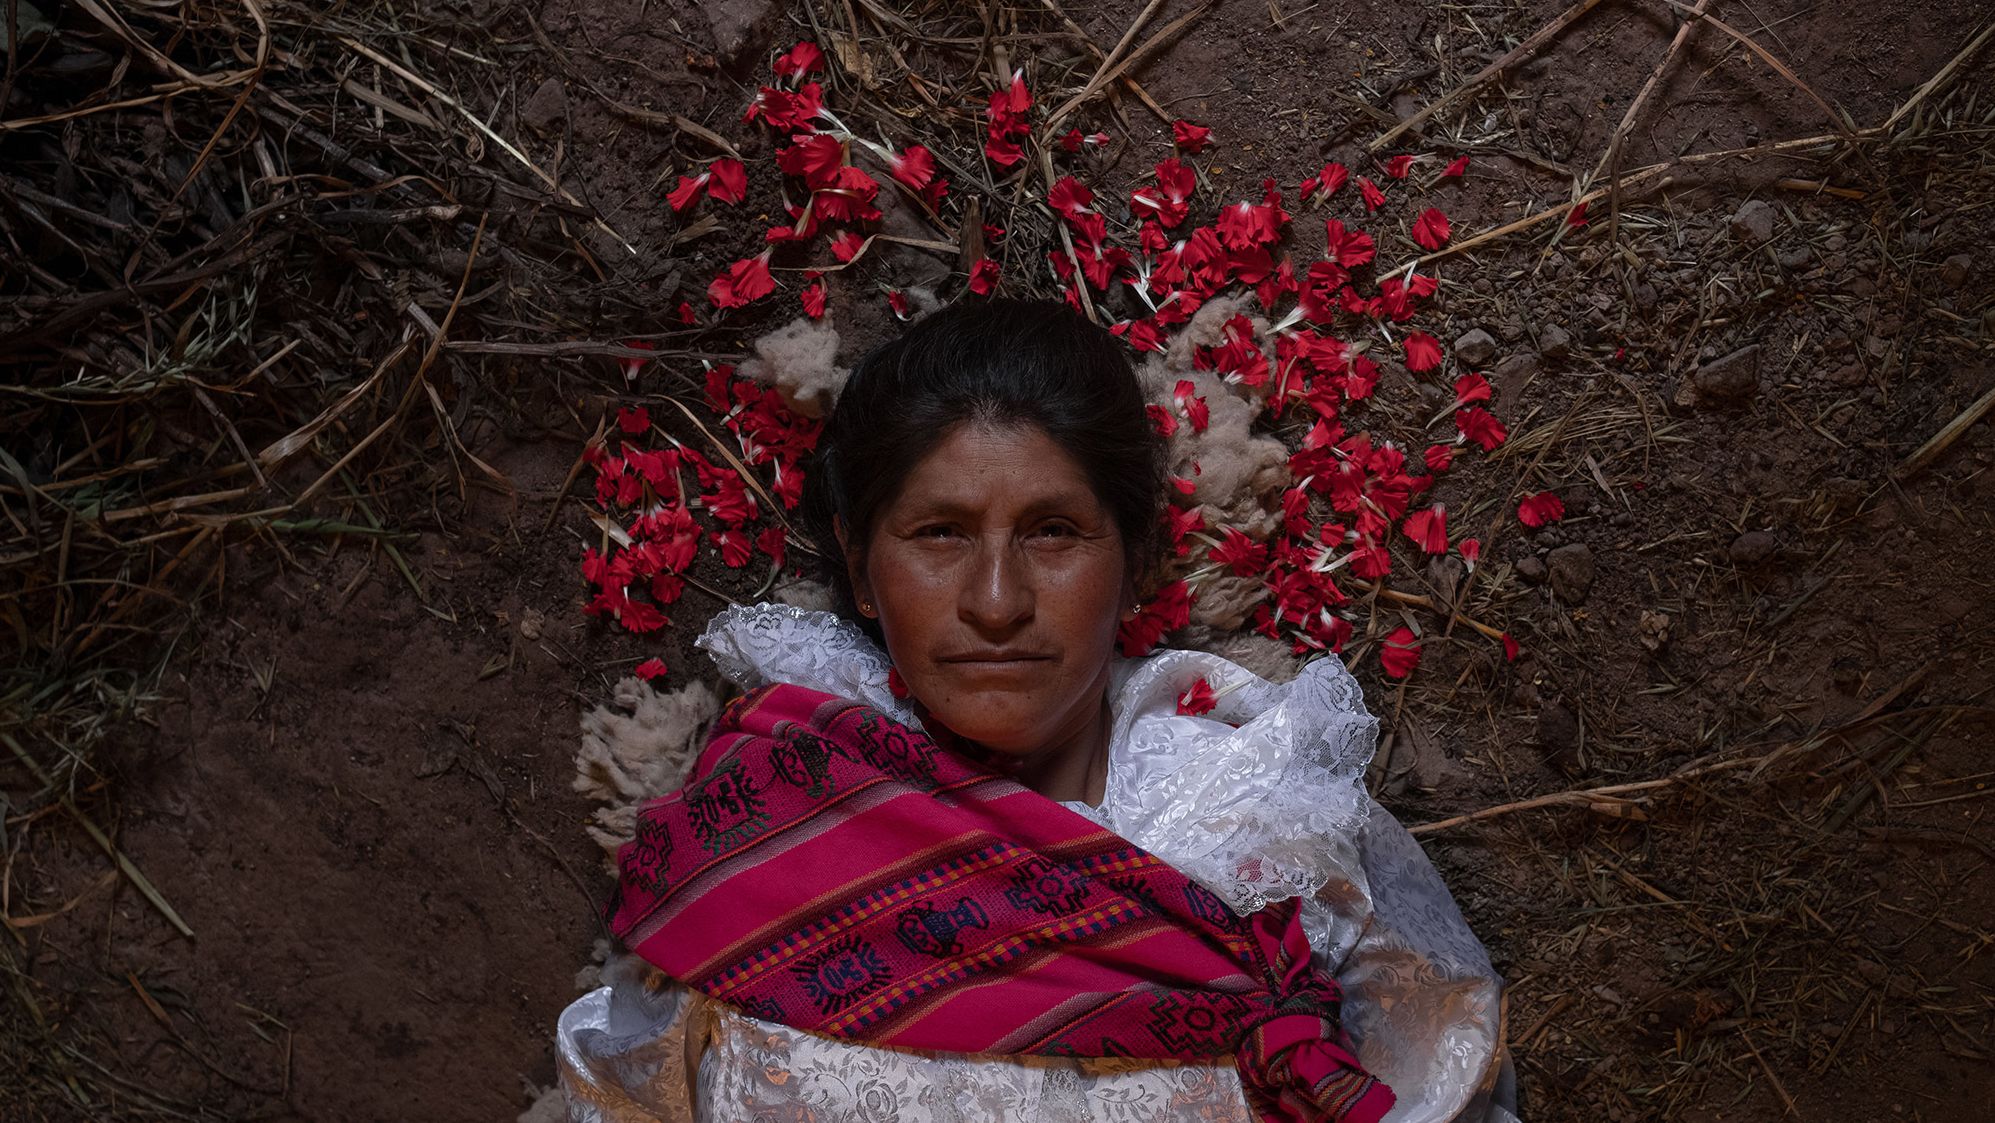 <strong>Florence Goupil, based in Cusco, Peru:</strong> Concepcion, a Quechua woman from the southern Andes in Peru, testified that she was sterilized without her consent while she was sleeping, after giving birth to her third child at the age of 28. She is one of <a href="https://www.bbc.co.uk/news/world-latin-america-56201575" target="_blank" target="_blank">thousands of women who say they were victims of forced sterilizations</a> between 1996 and 2000 as part of a reproductive health programme run by the government of then-President, Alberto Fuijimori. [Fujimori has claimed all sterilizations were consensual.]<br /> <br />I received the news of this assignment with mixed feelings: solemn but also joyful at the possibility of dealing with this important topic from my point of view. I wanted to show the injustice Quechua women have been living with for more than 25 years, but also to represent them with dignity. To do so, I first took into account my own history, as all the women in my family are of Quechua descent.<br /> <br />Everywhere I have gone in Peru, I have encountered countless women who have been sterilized. This portrait of Concepcion represents, for me, the women who raised their voices in defense of their human rights and it's also a call to those who remain hidden.